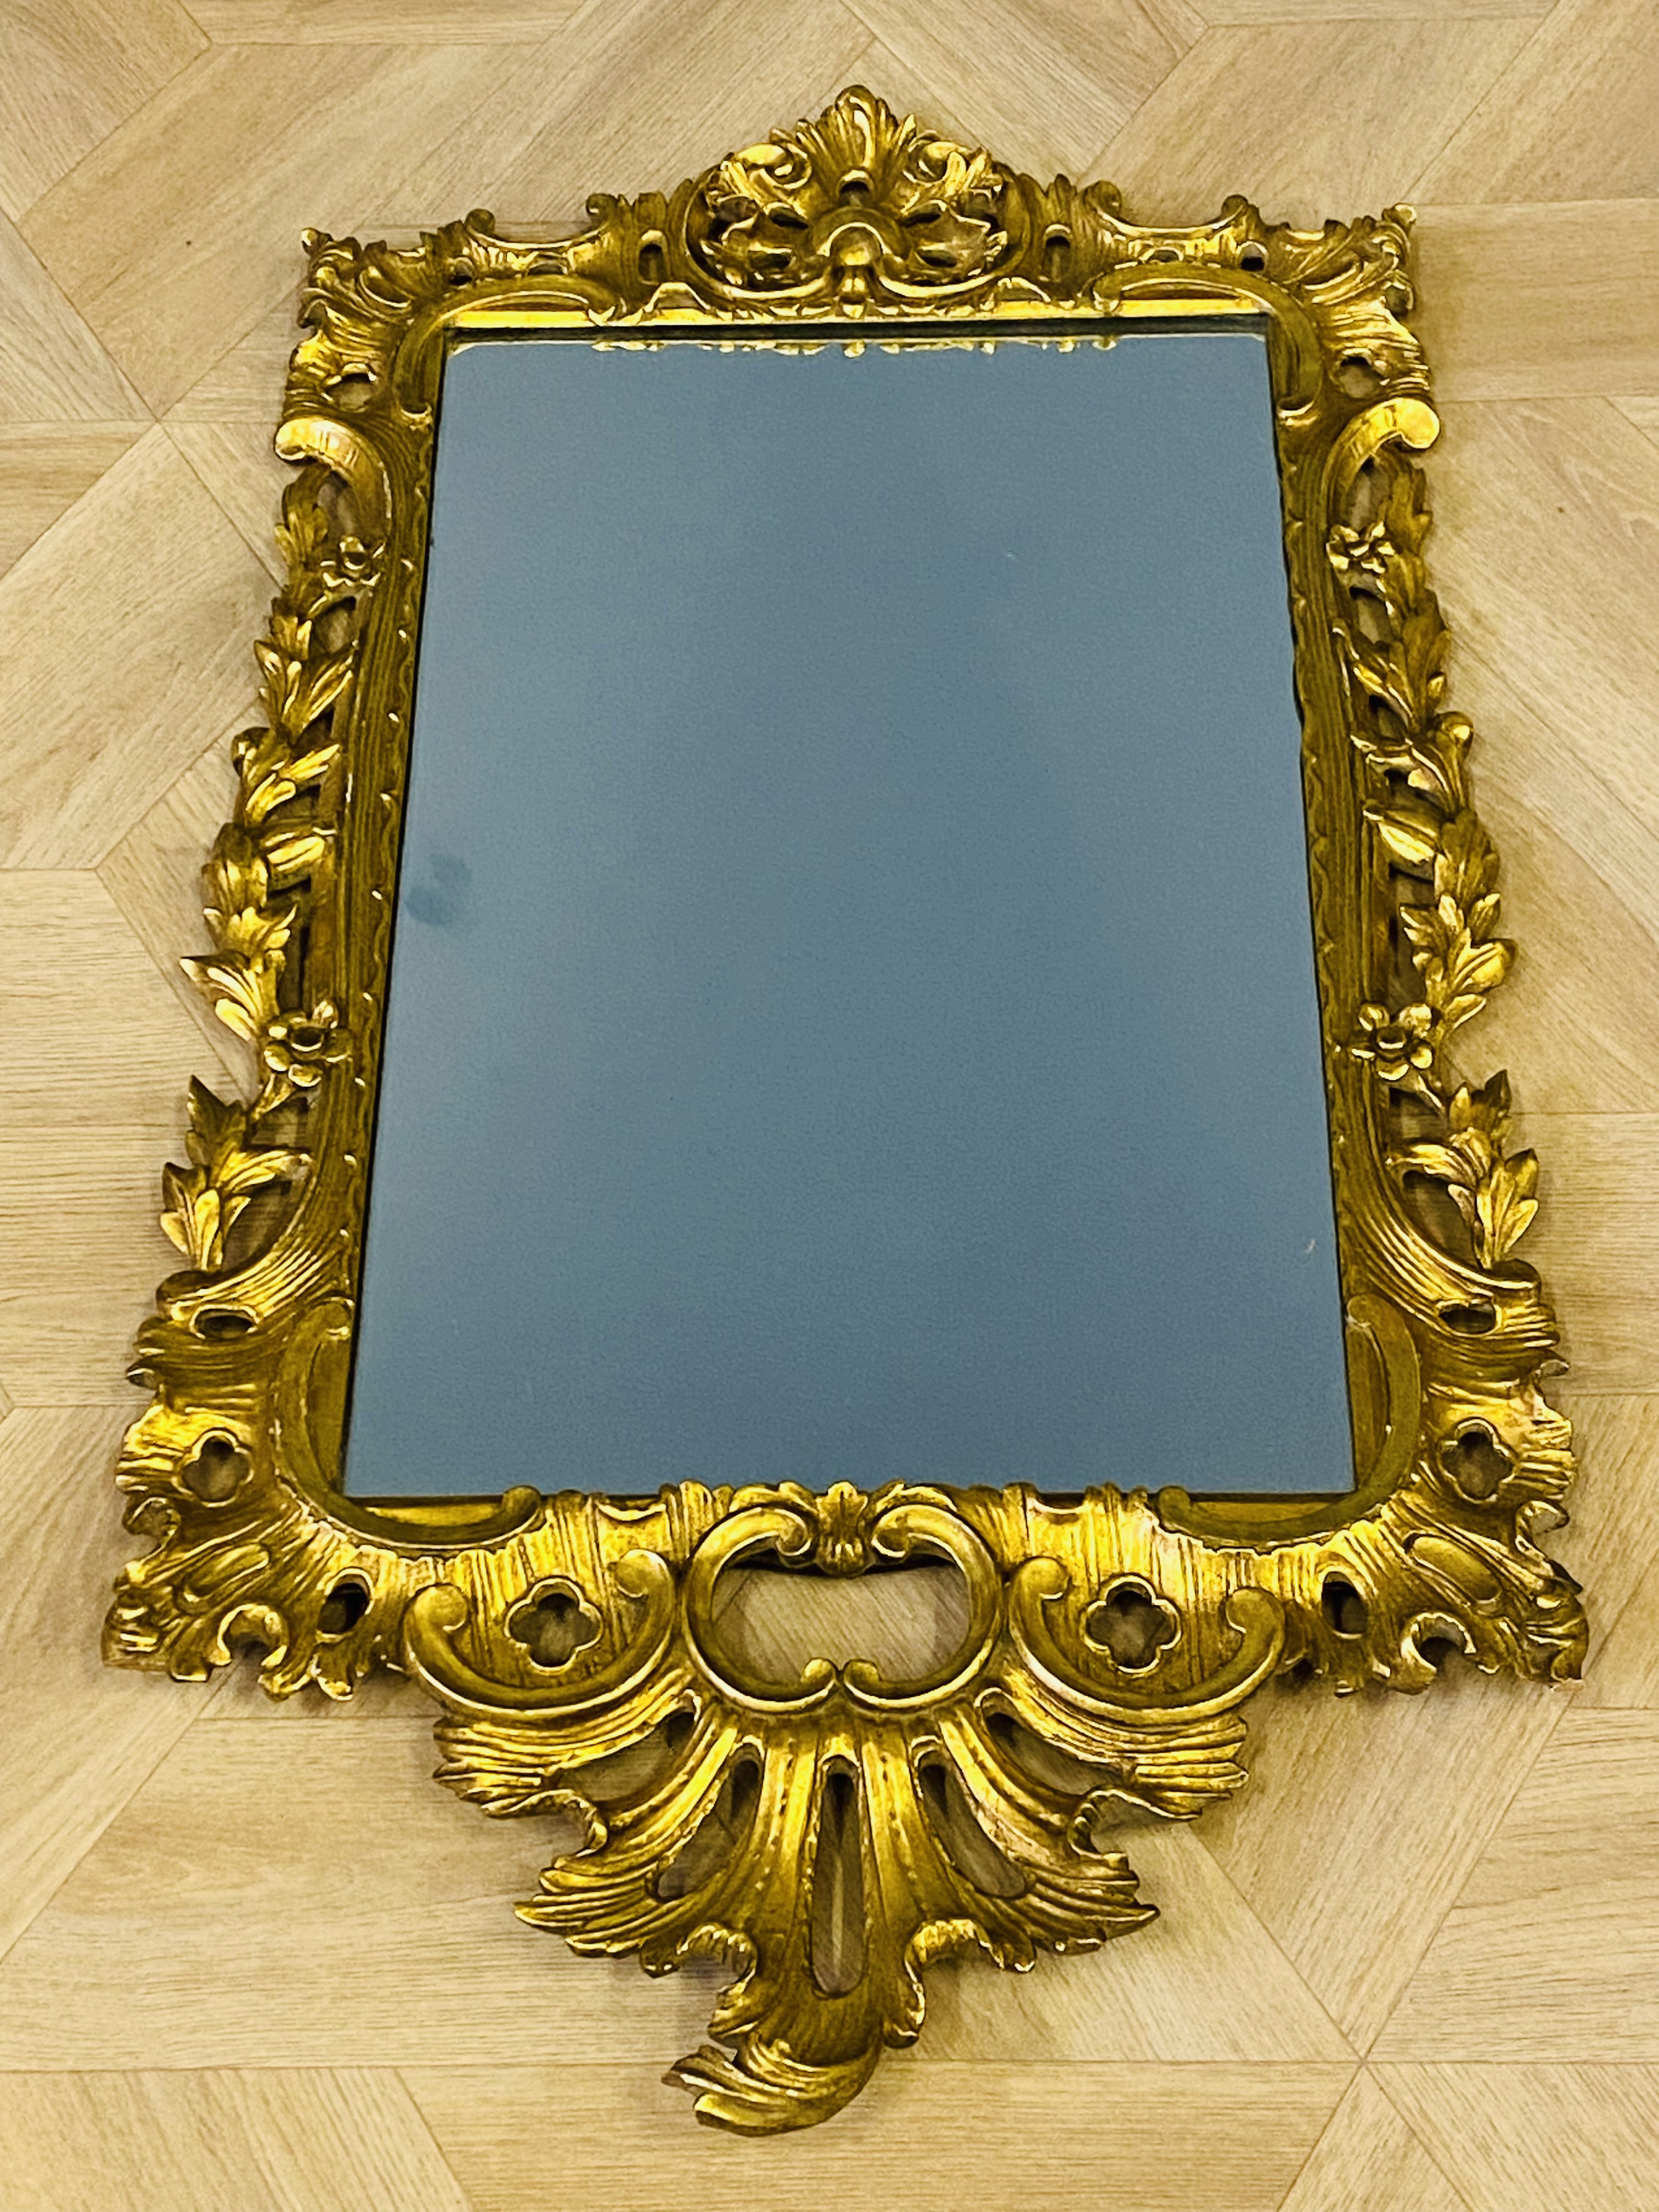 Georgian style carved giltwood mirror - Image 2 of 6